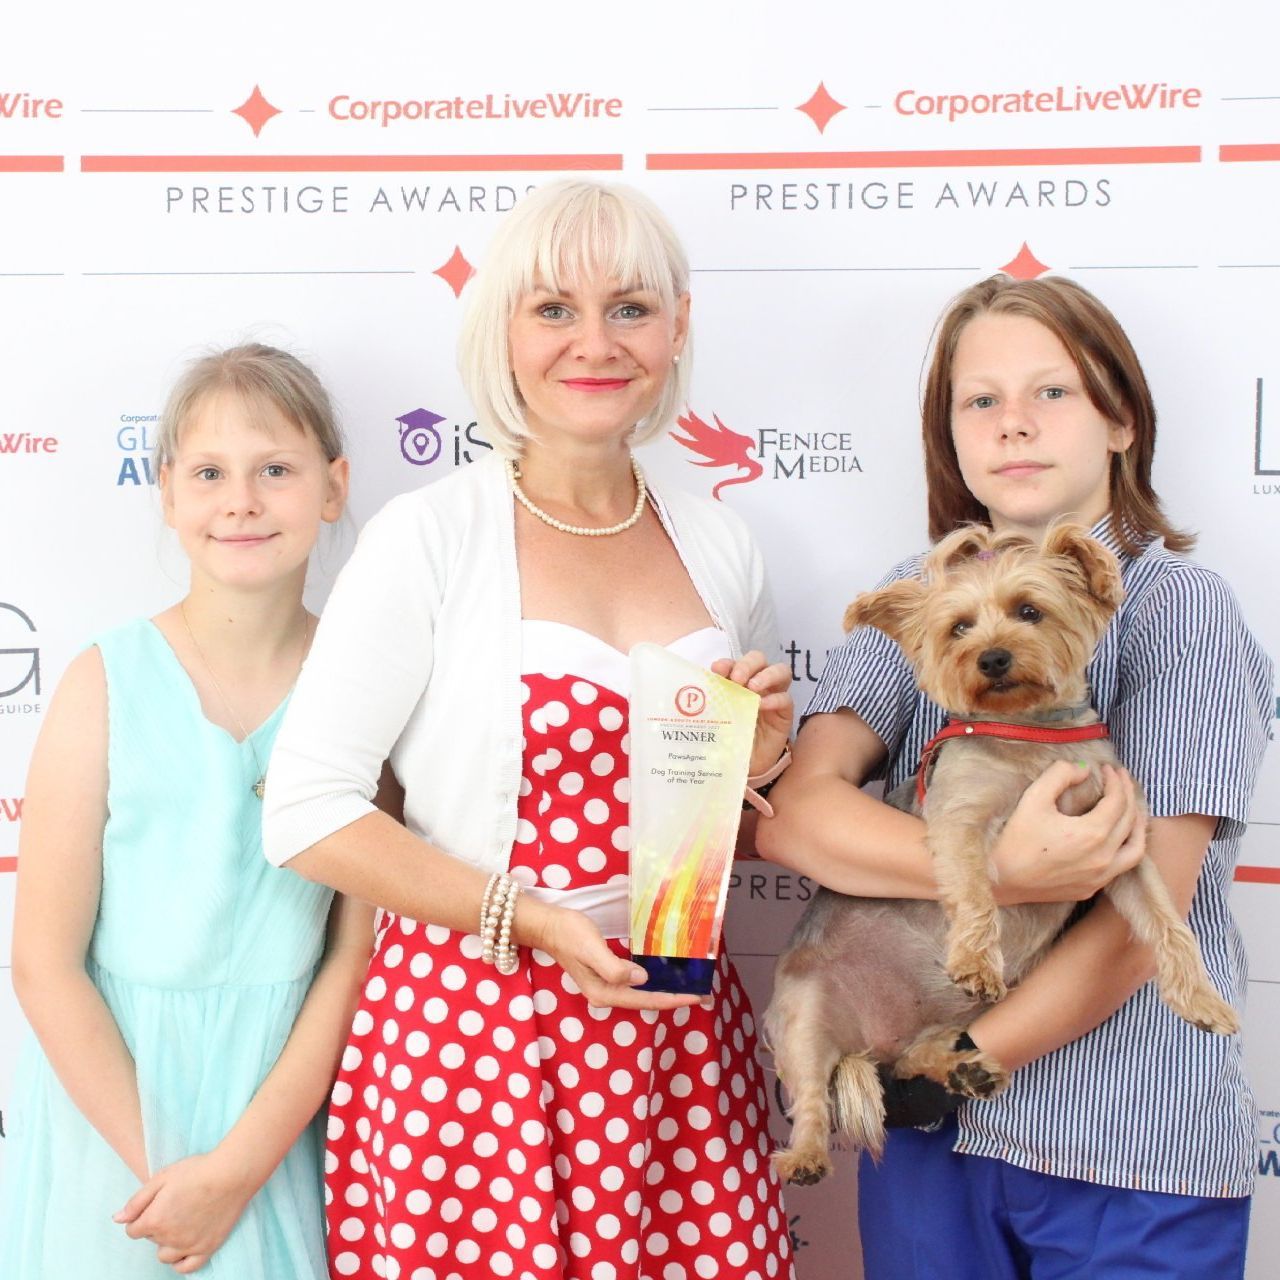 A middle-aged woman in a spotted dress holding an award. Two children stand either side, one holding a small dog.